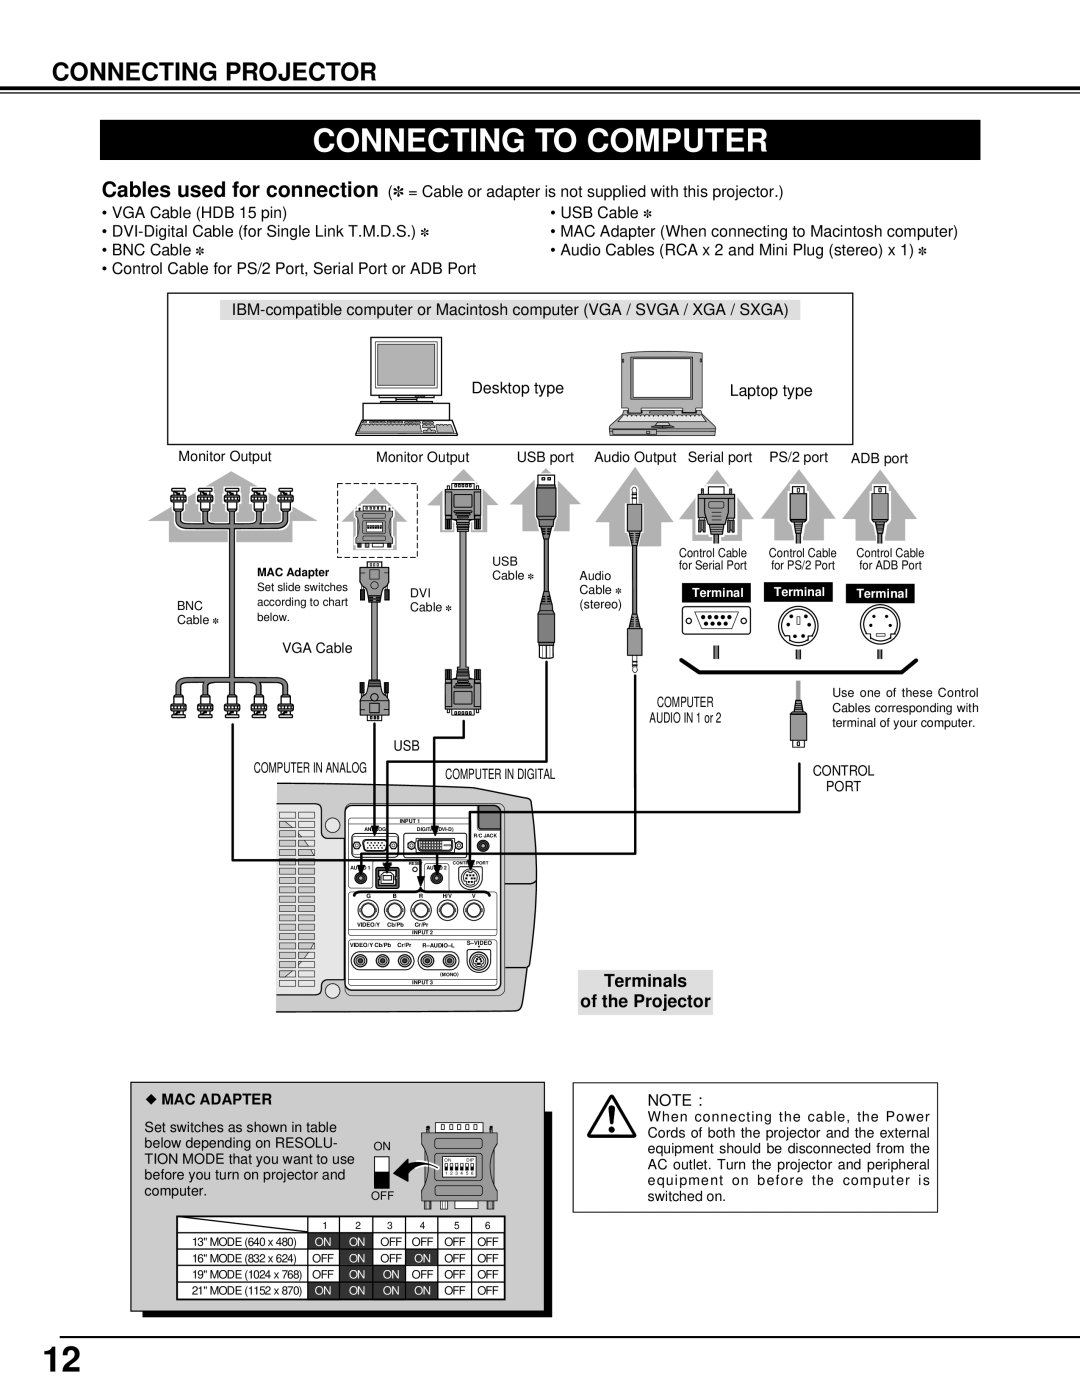 Christie Digital Systems 38-VIV205-01 user manual Connecting To Computer, Connecting Projector, Terminals of the Projector 